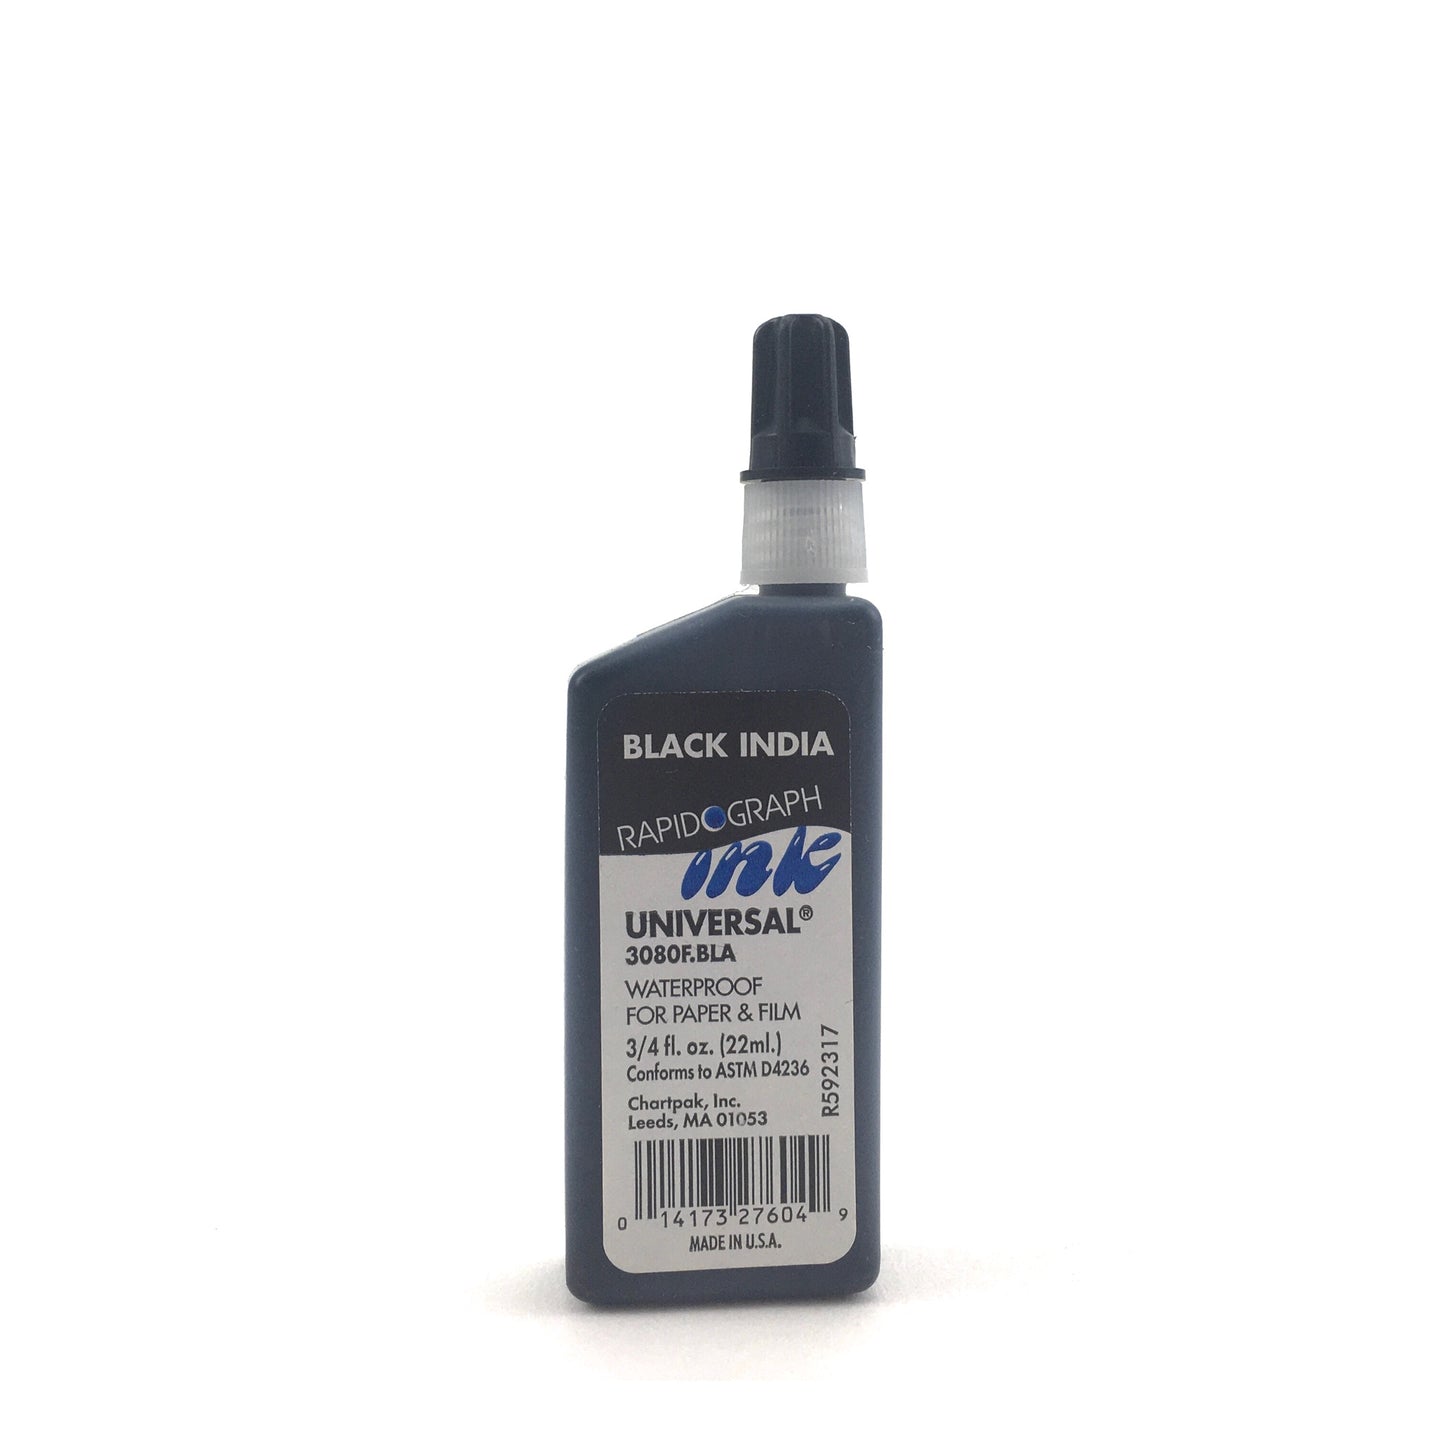 Koh-I-Noor Rapidograph Universal Technical Inks - Black by Chartpak - K. A. Artist Shop